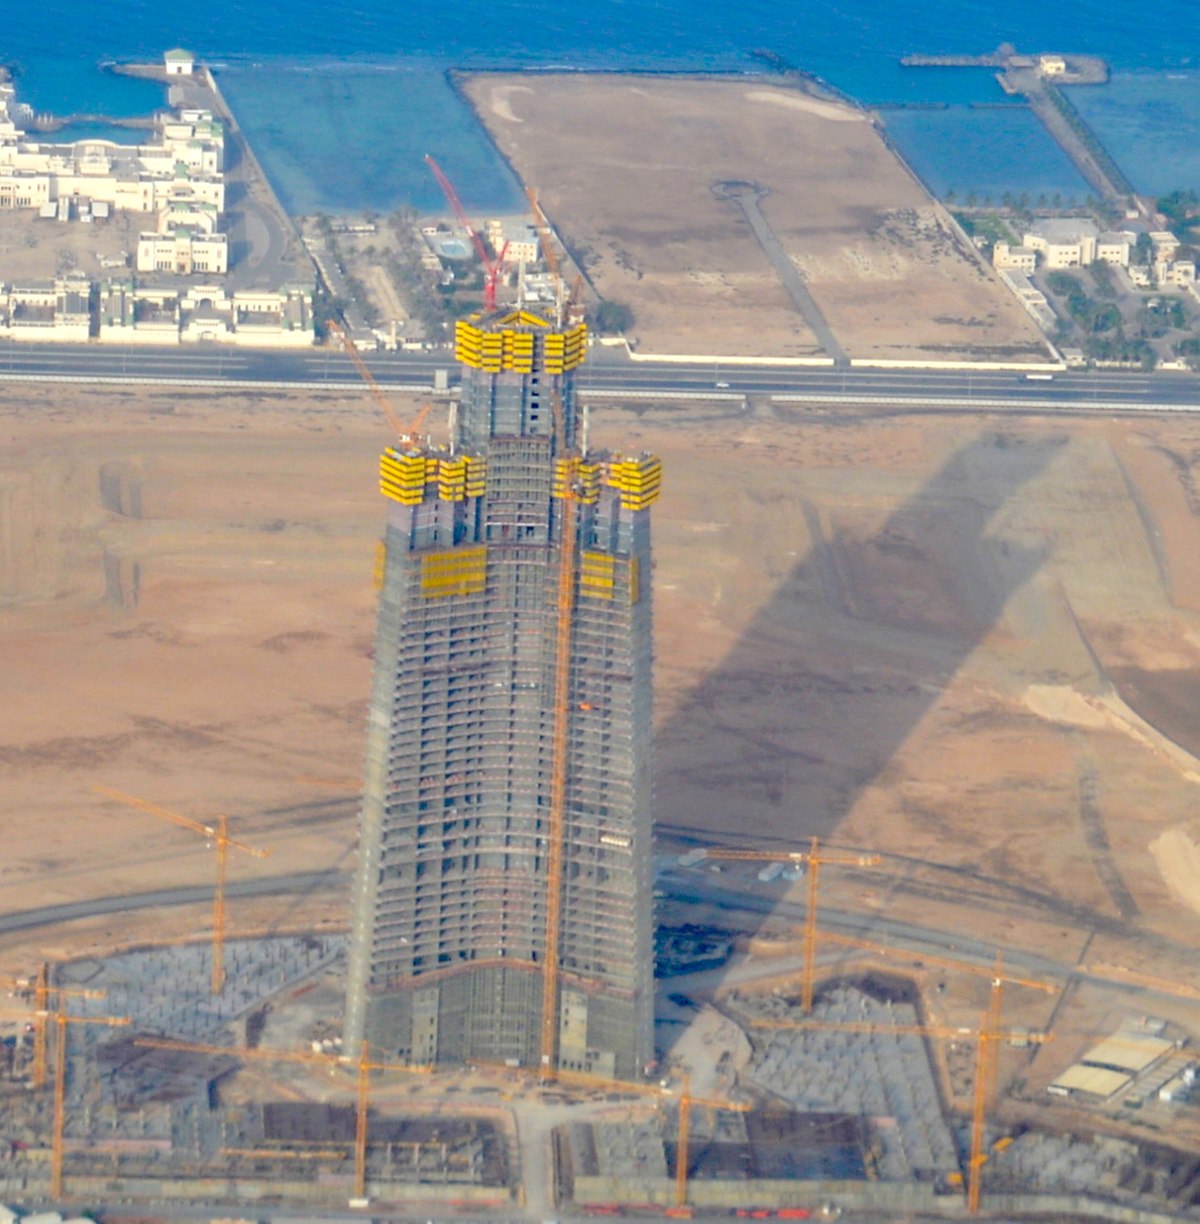 Jeddah Tower: Staggering Mile-High Marvel Set to Eclipse Burj Khalifa’s Record in the Sky!